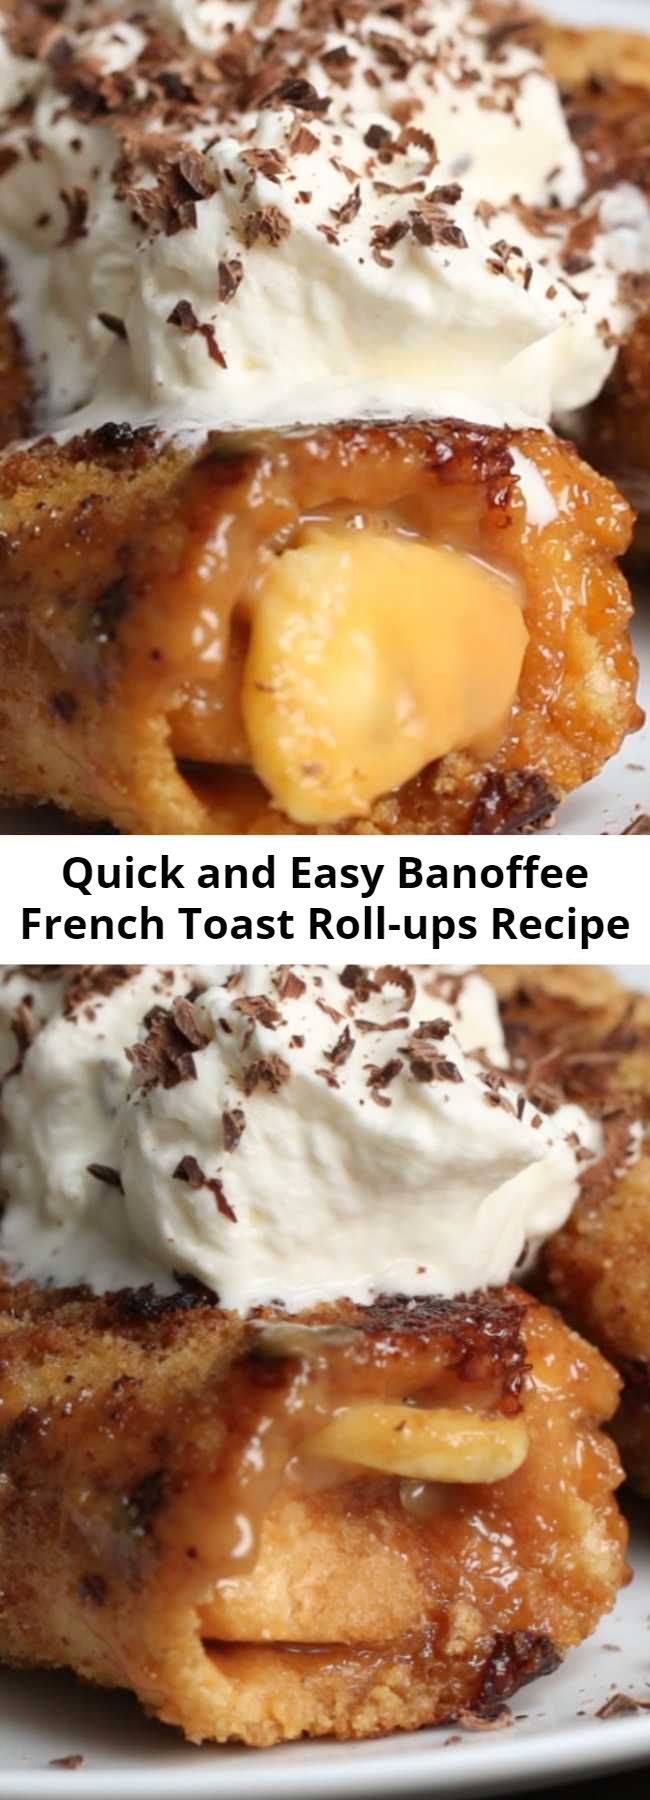 Quick and Easy Banoffee French Toast Roll-ups Recipe